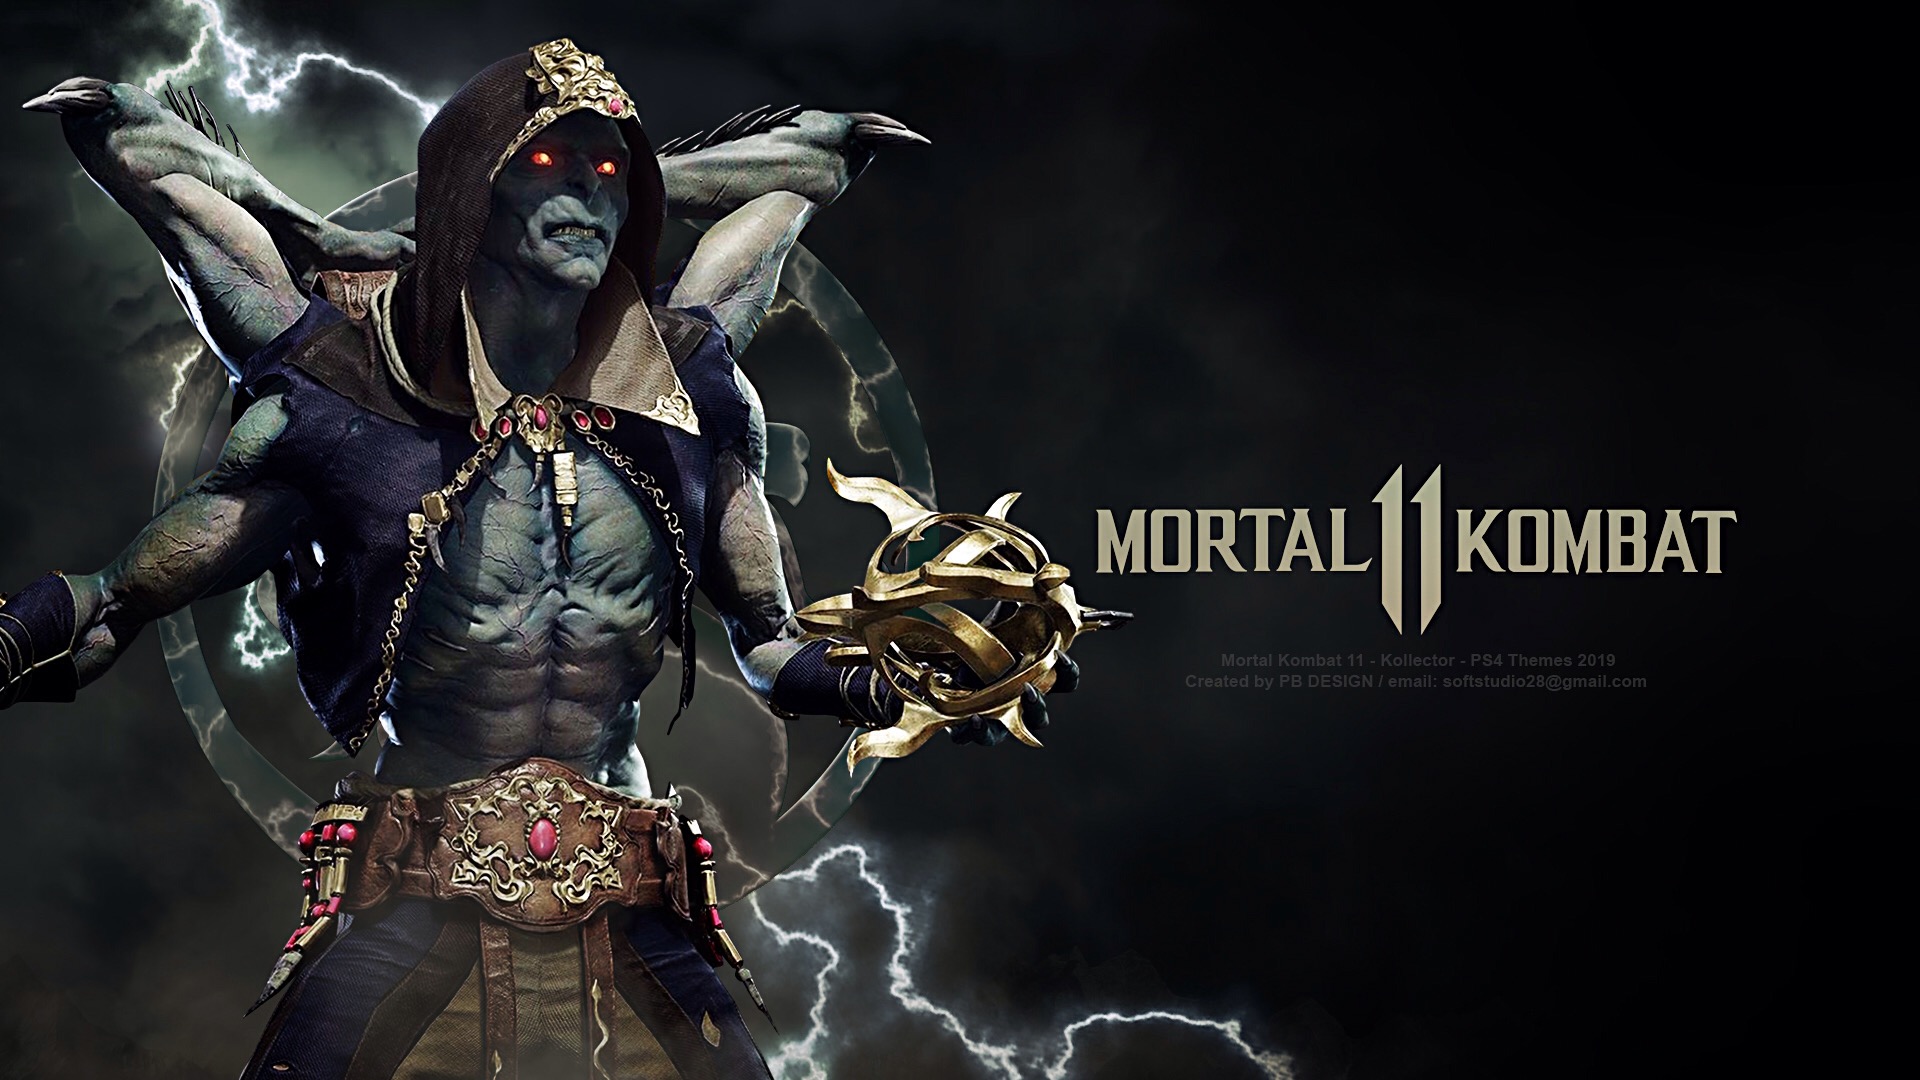 MK11   Kollector   PS4 Themes   by PBD by PBDesign28 on